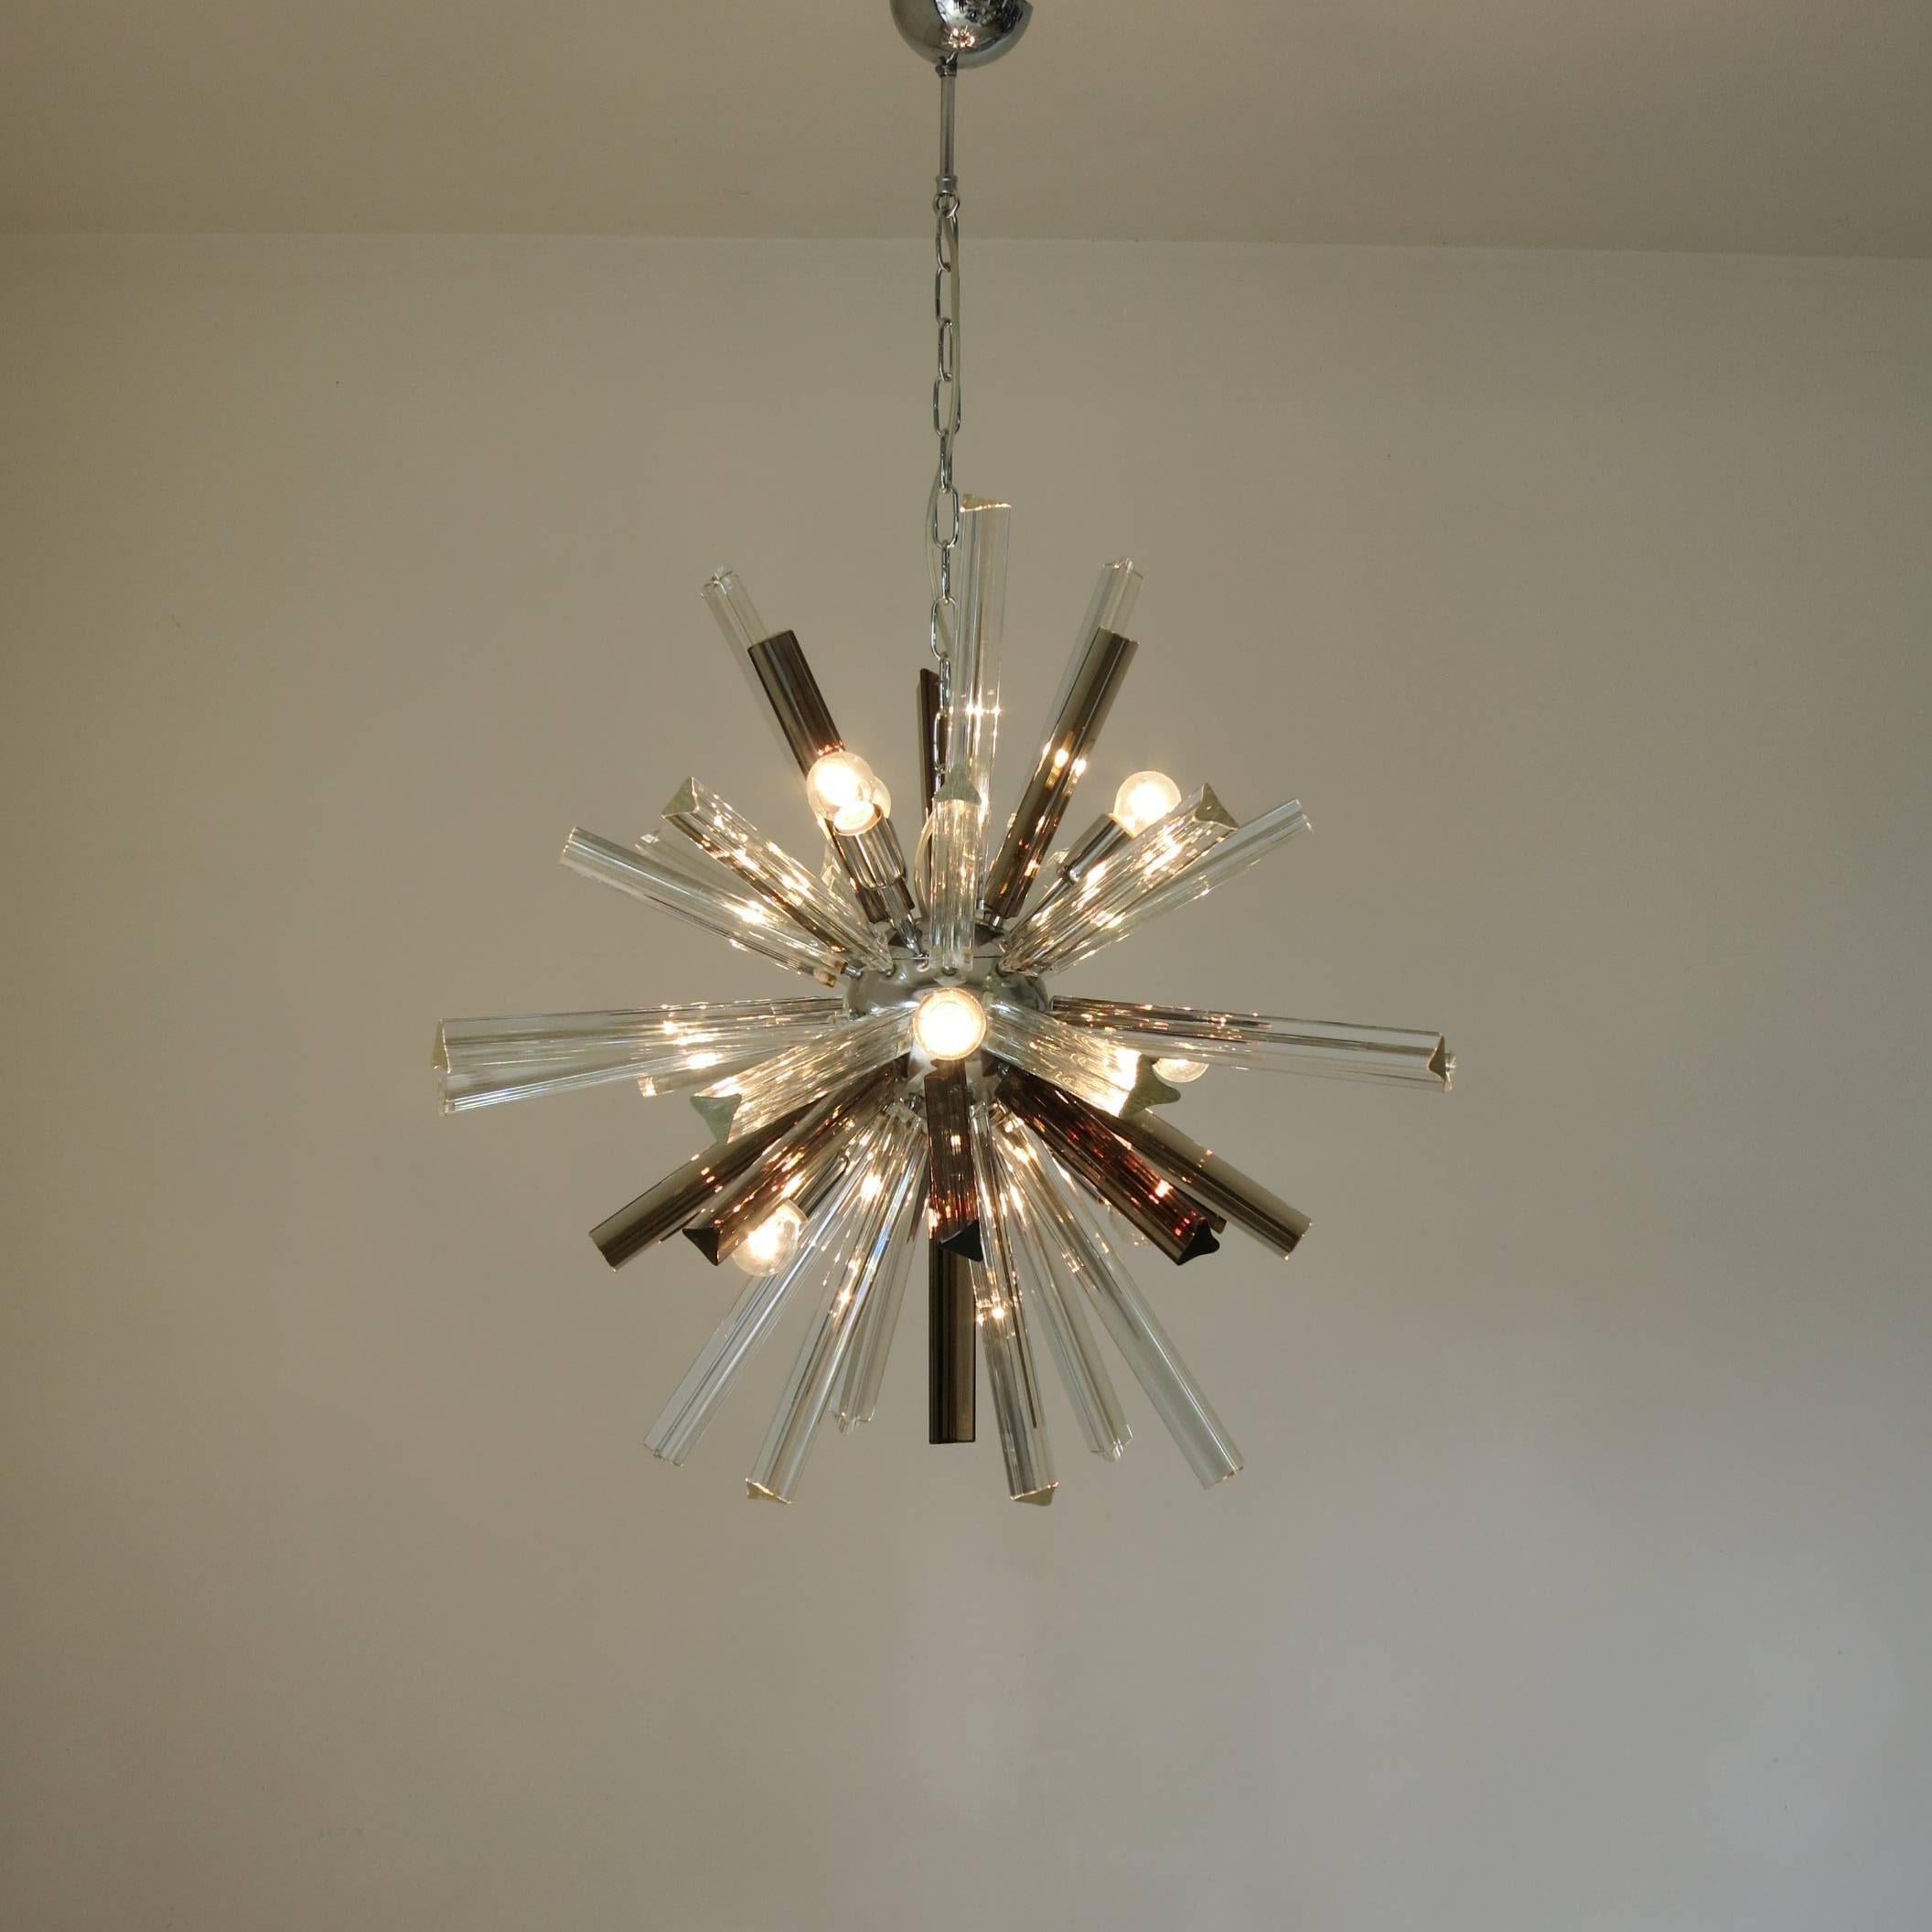 Vintage Italian chandelier with clear and smoky Murano glass hand blown into three pointed crystals using Triedri technique on chrome frame, by Venini. / Made in Italy in the 1960's,
9 lights / max 40W each
Diameter: 29 inches / Height: 26 inches